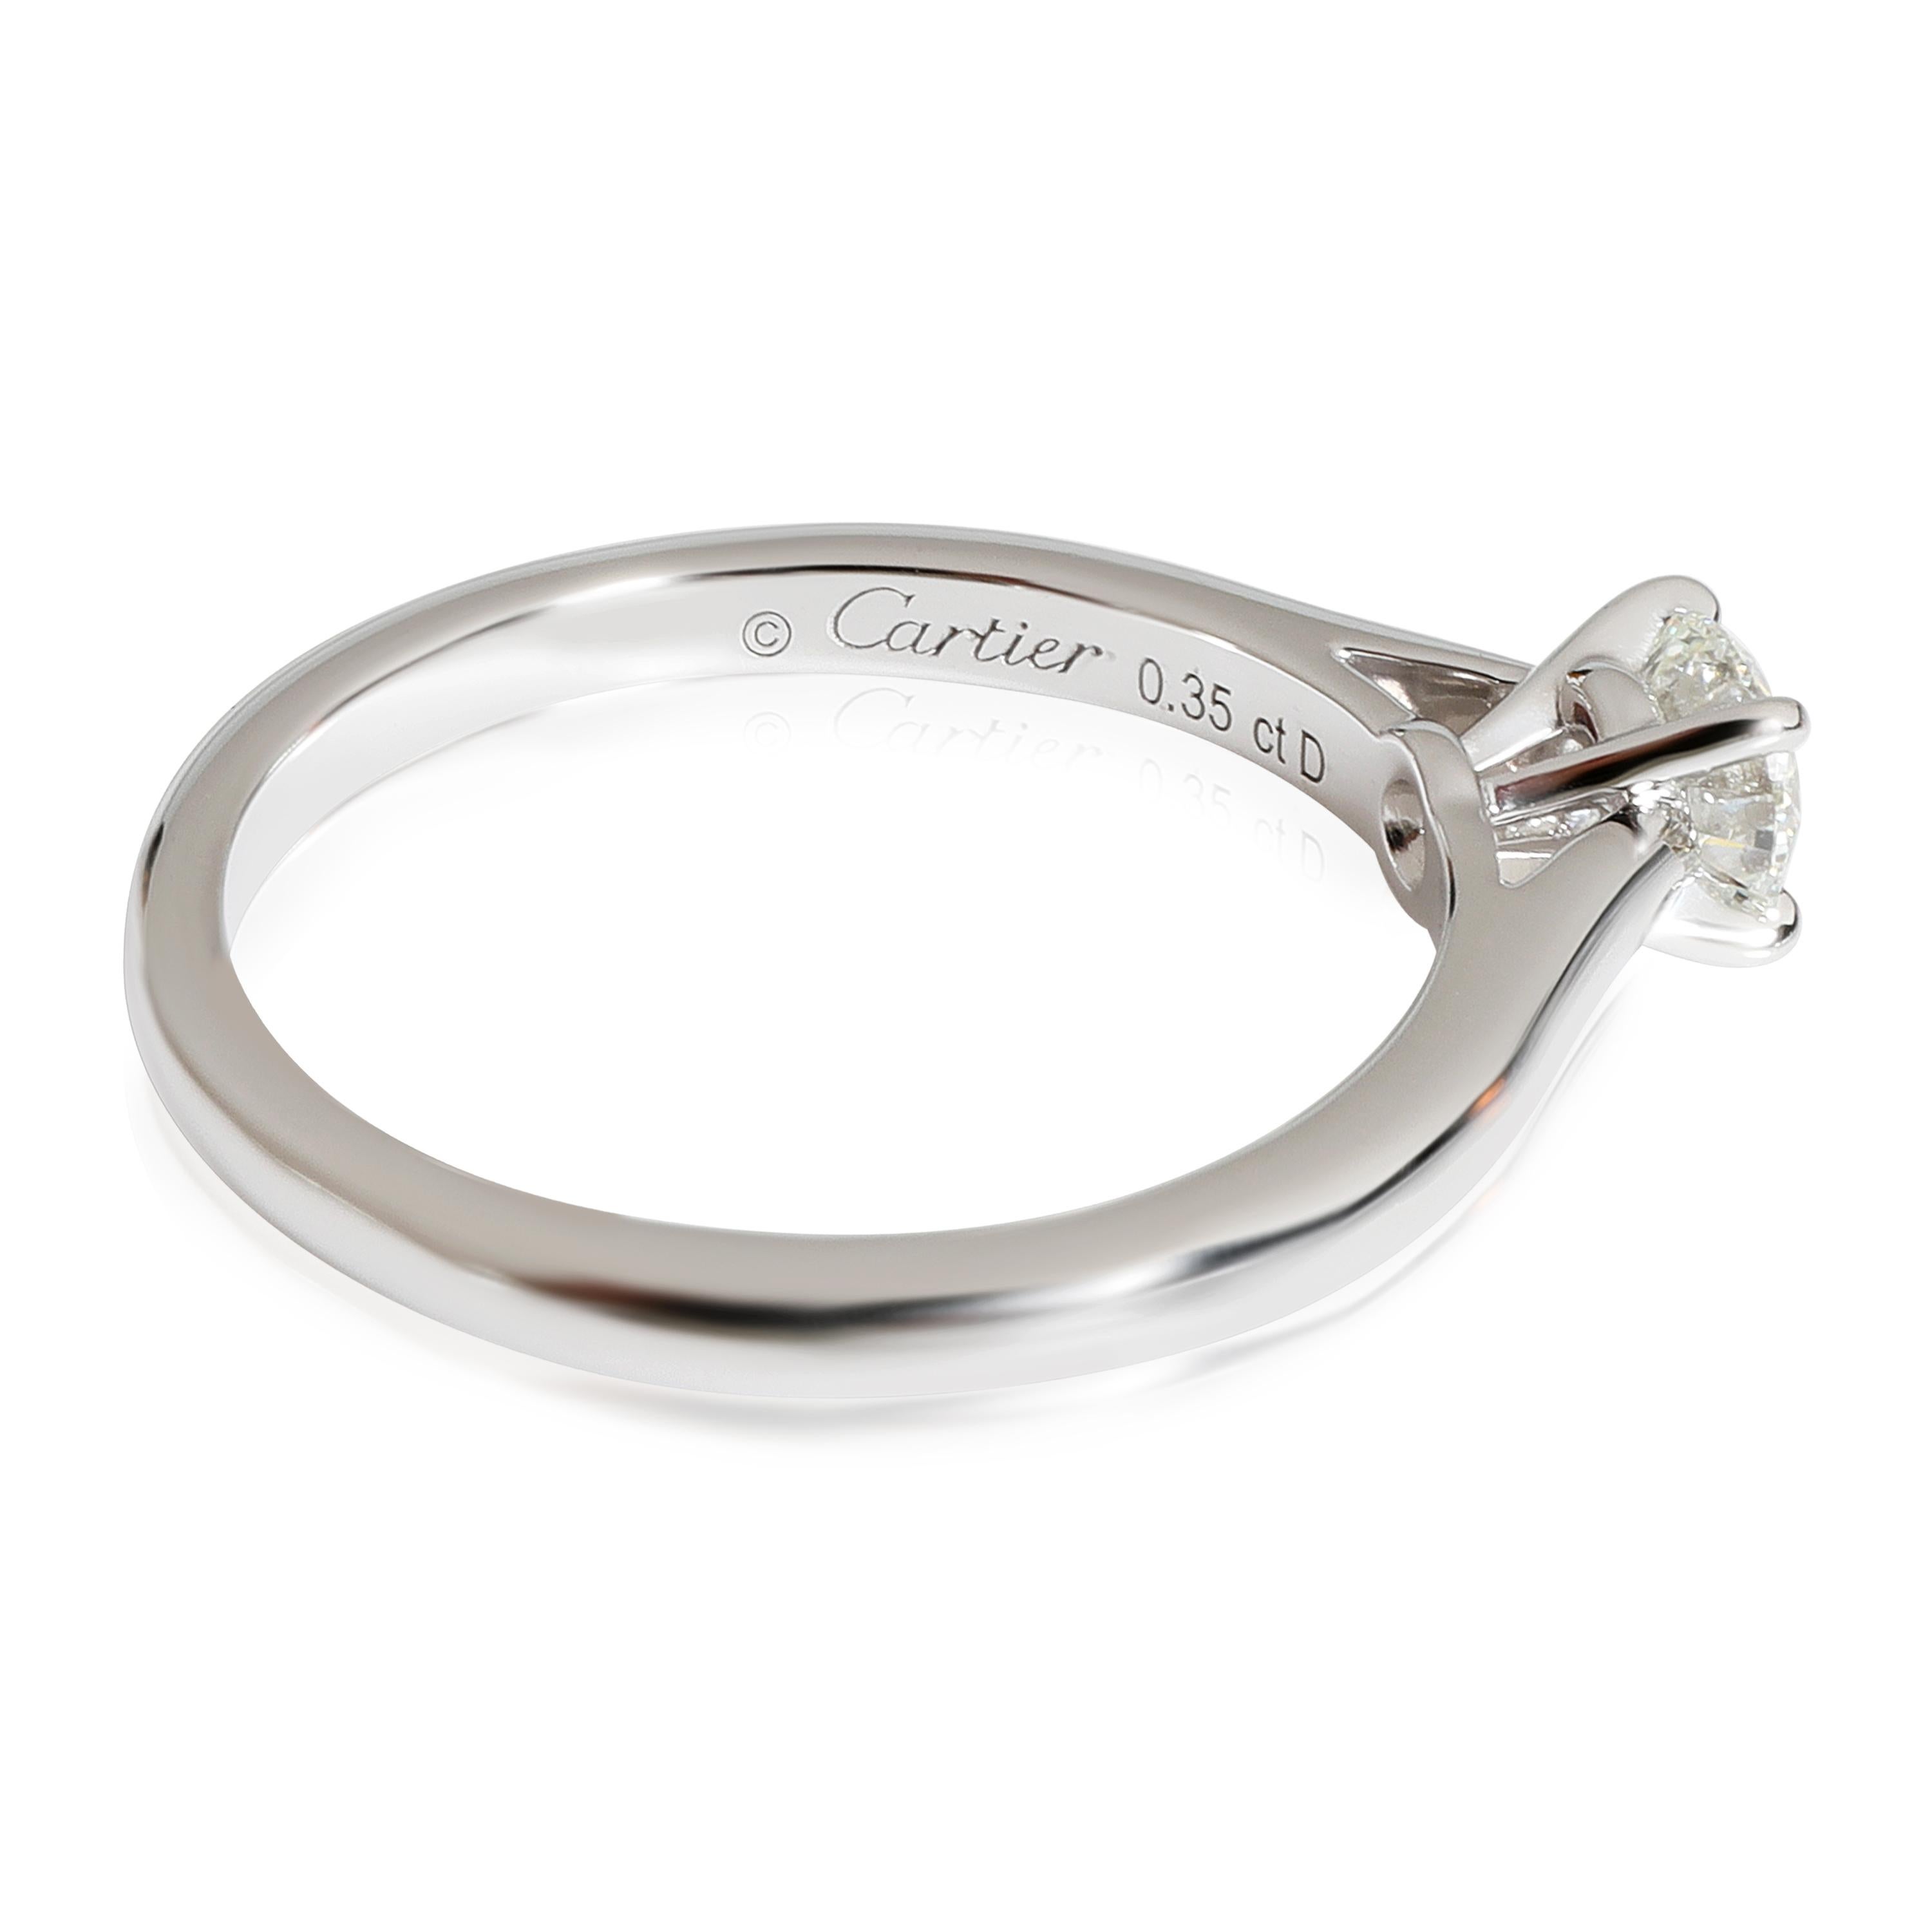 Cartier 1895 Diamond Engagement Ring in Platinum G VS1 0.35 CTW

PRIMARY DETAILS
SKU: 116576
Listing Title: Cartier 1895 Diamond Engagement Ring in Platinum G VS1 0.35 CTW
Condition Description: Retails for 4470 USD. In excellent condition and